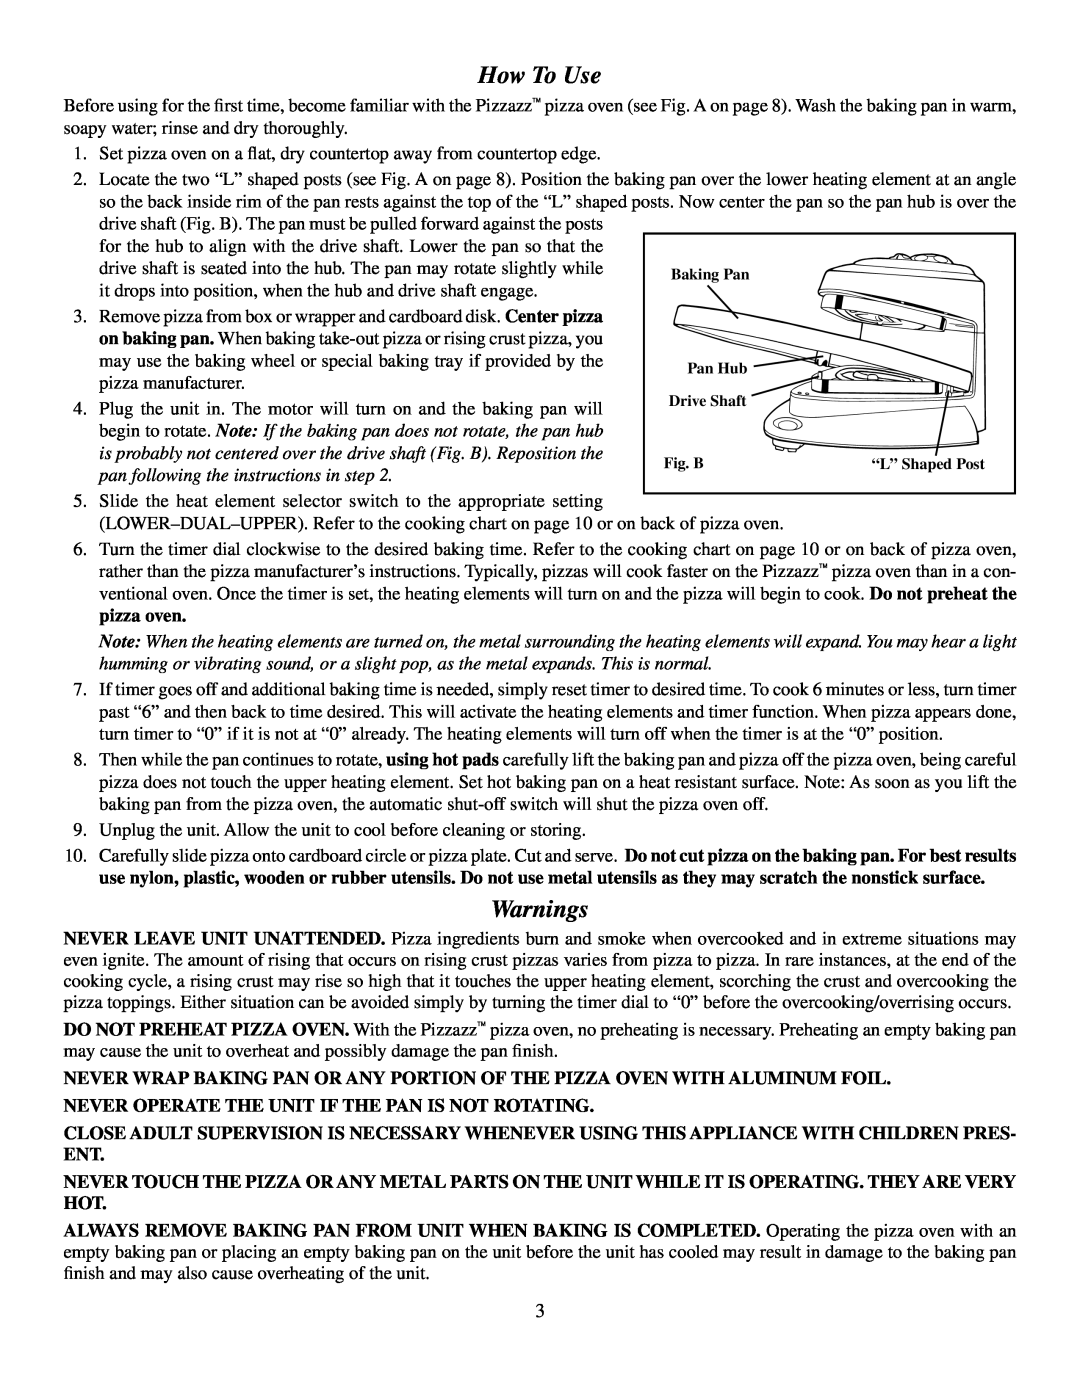 Presto Pizzazz Oven manual How To Use, Warnings 